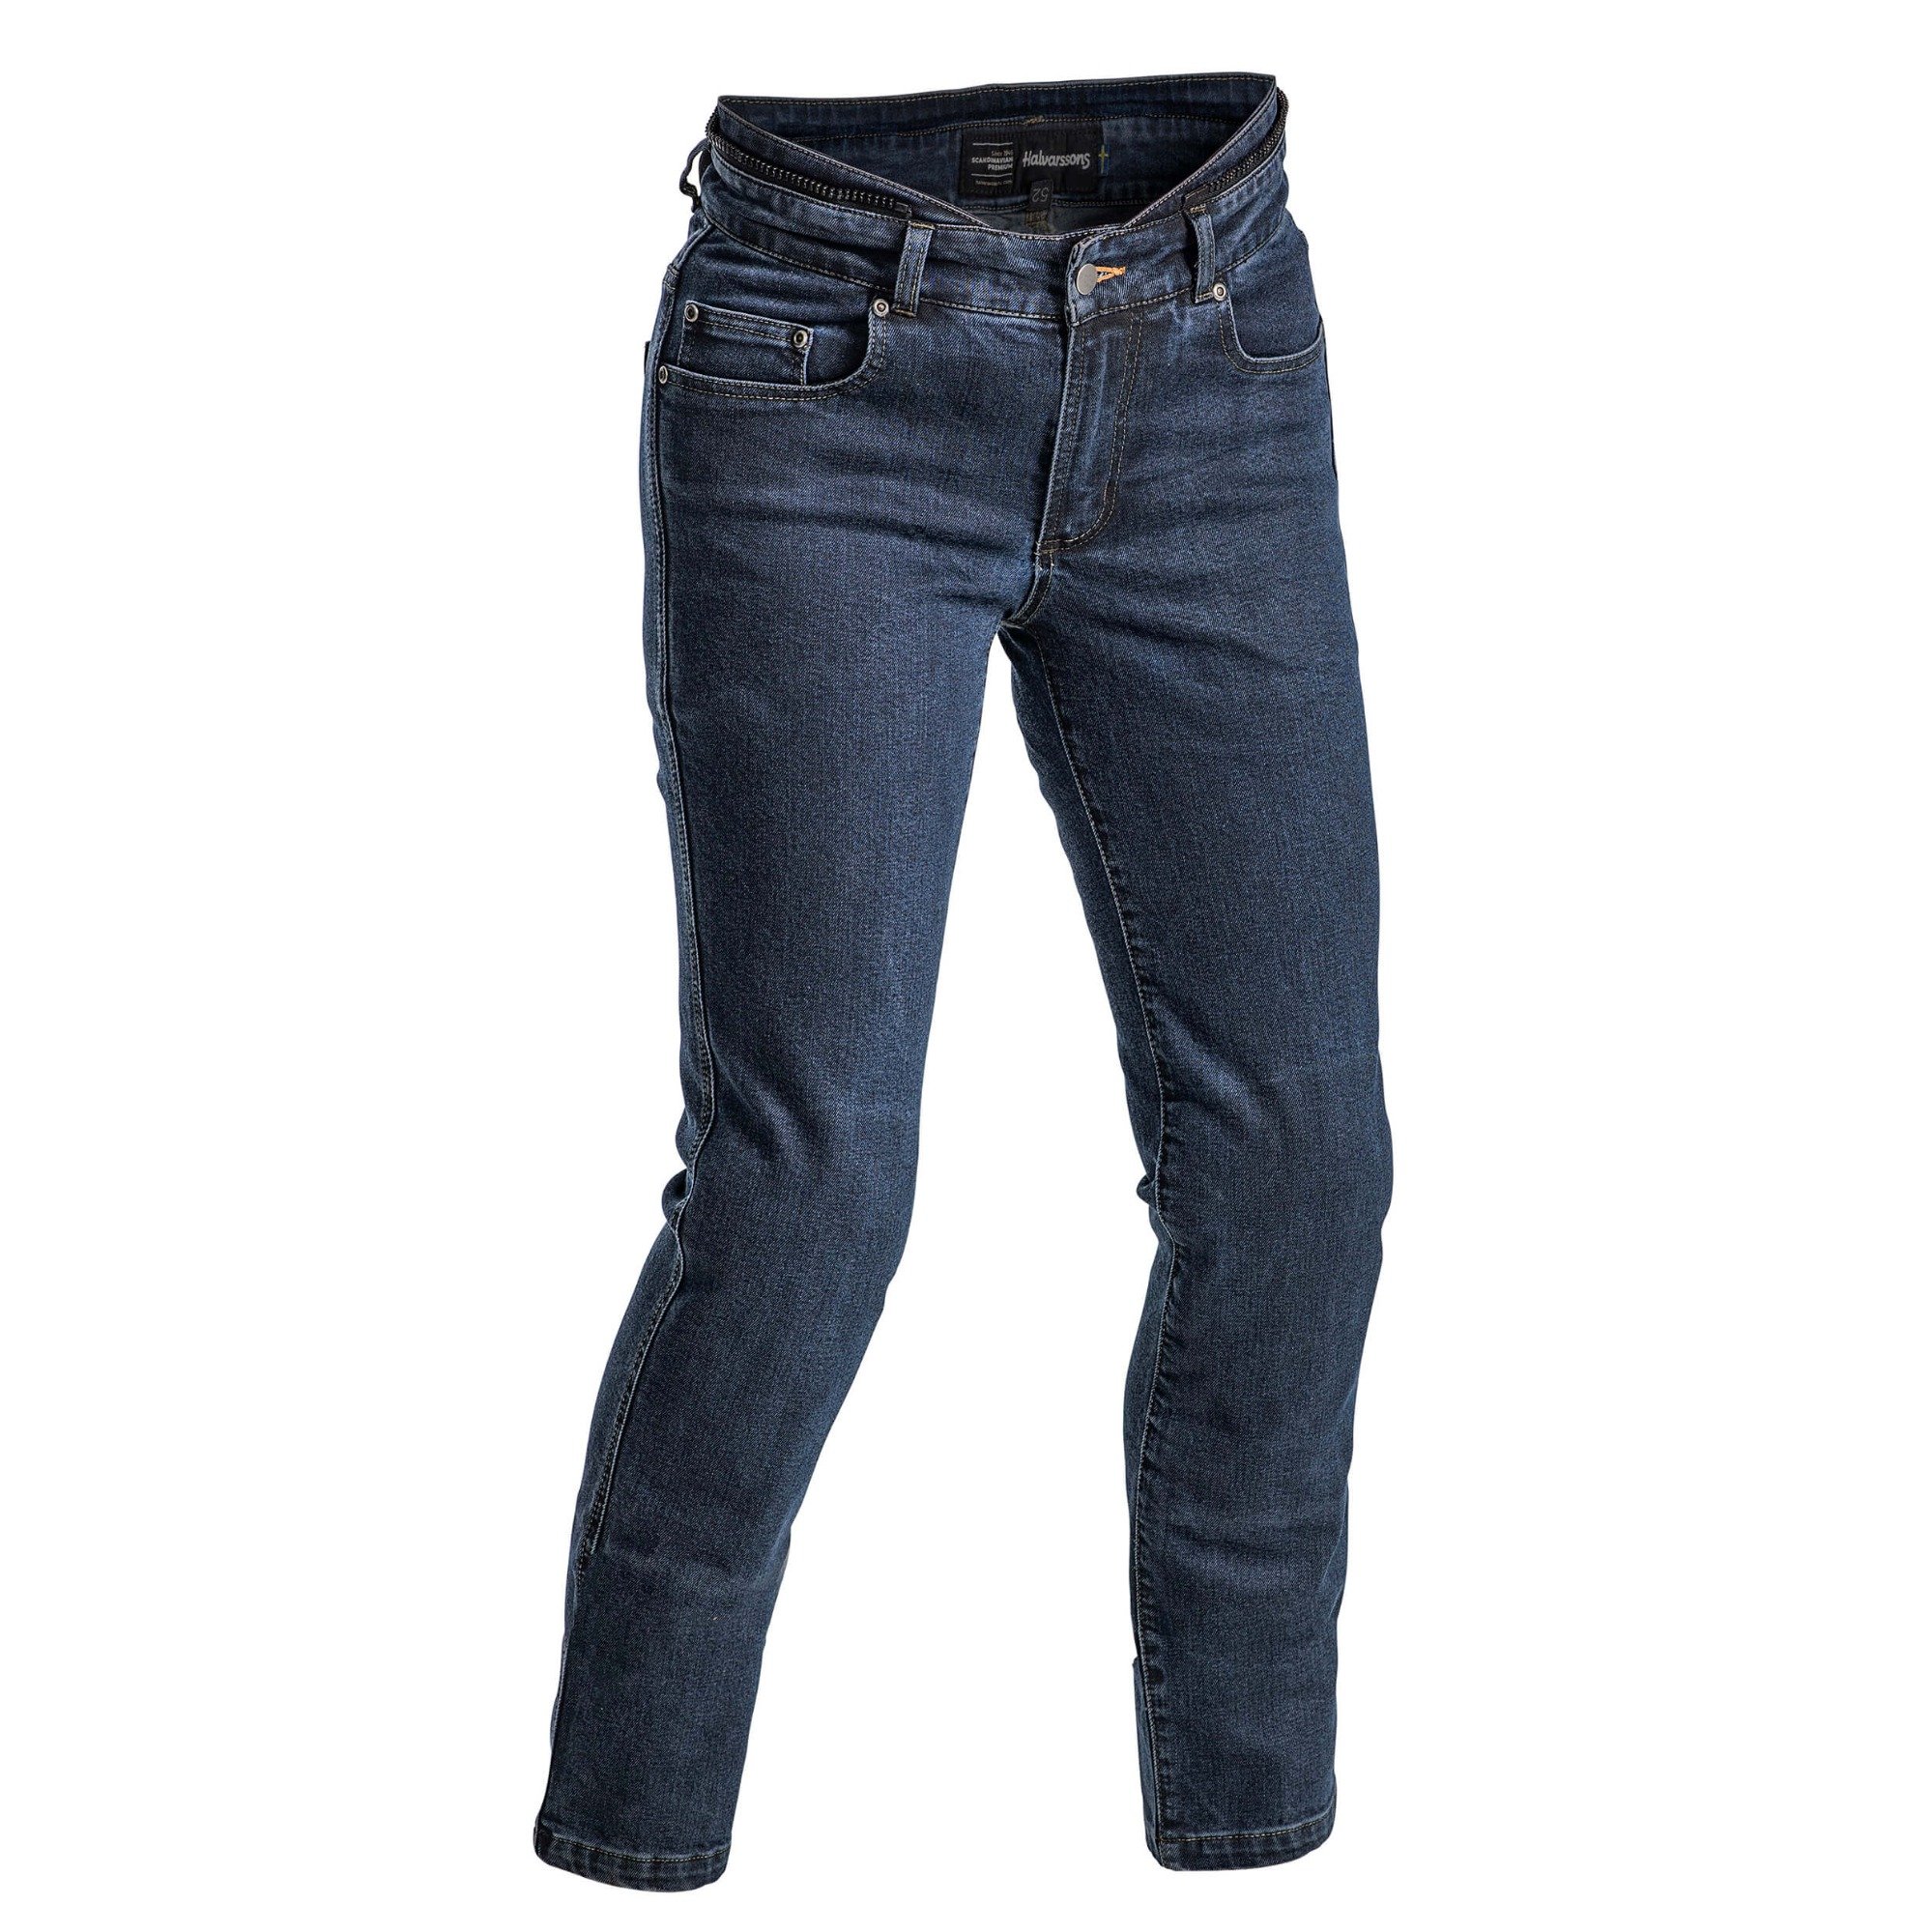 Image of Halvarssons Jeans Rogen Woman Blue Size 44 ID 6438235239133